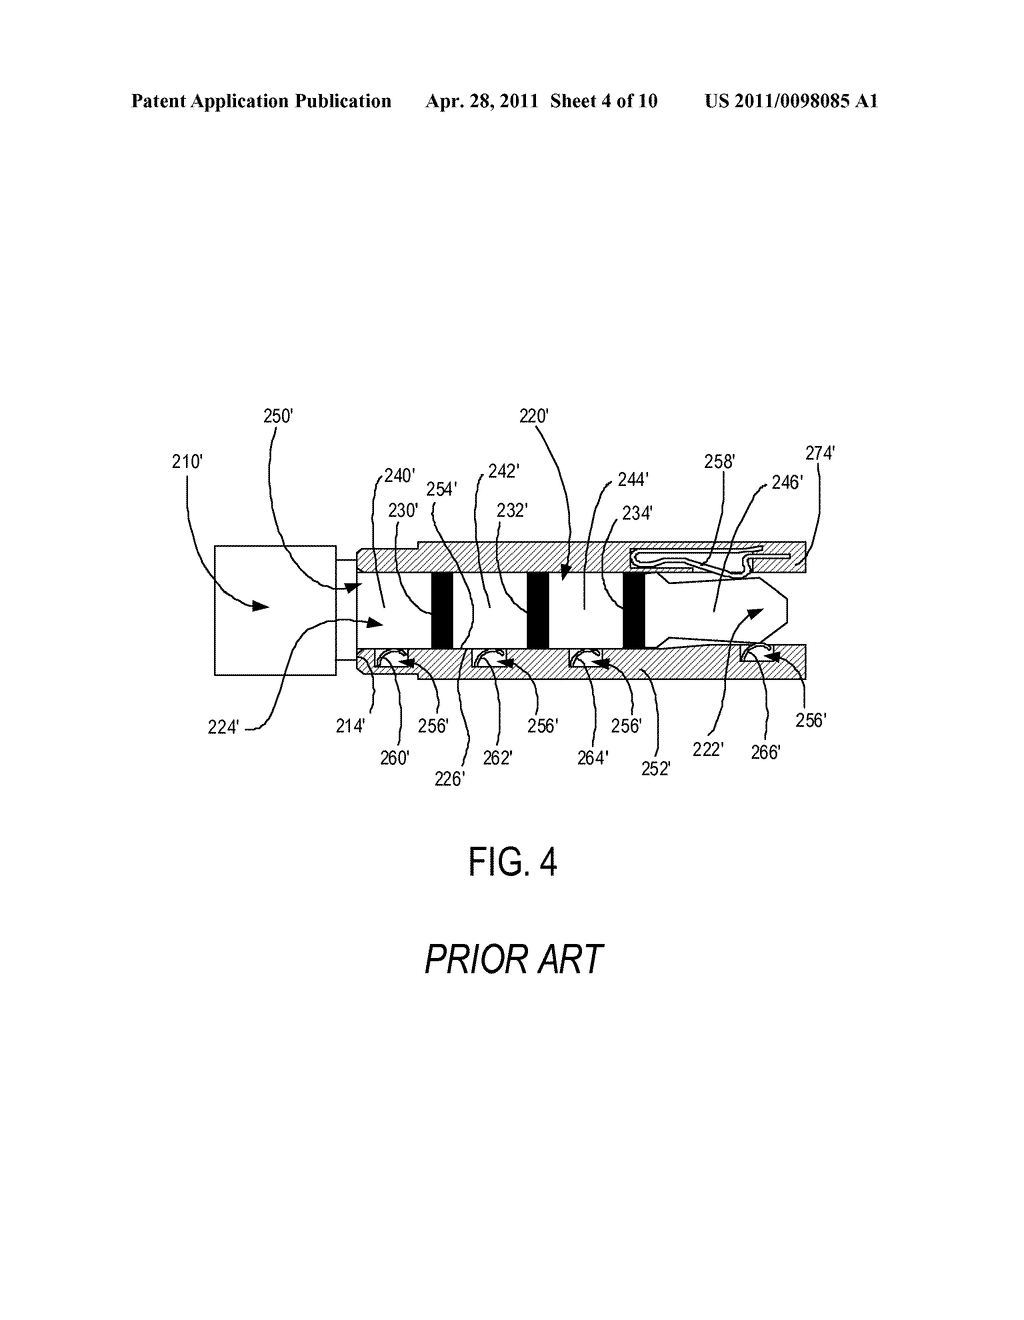 MOBILE COMMUNICATIONS DEVICE ACCESSORY IDENTIFICATION SYSTEM, AN IMPROVED ACCESSORY FOR USE WITH A MOBILE COMMUNICATIONS DEVICE, AND A METHOD OF IDENTIFYING SAME - diagram, schematic, and image 05